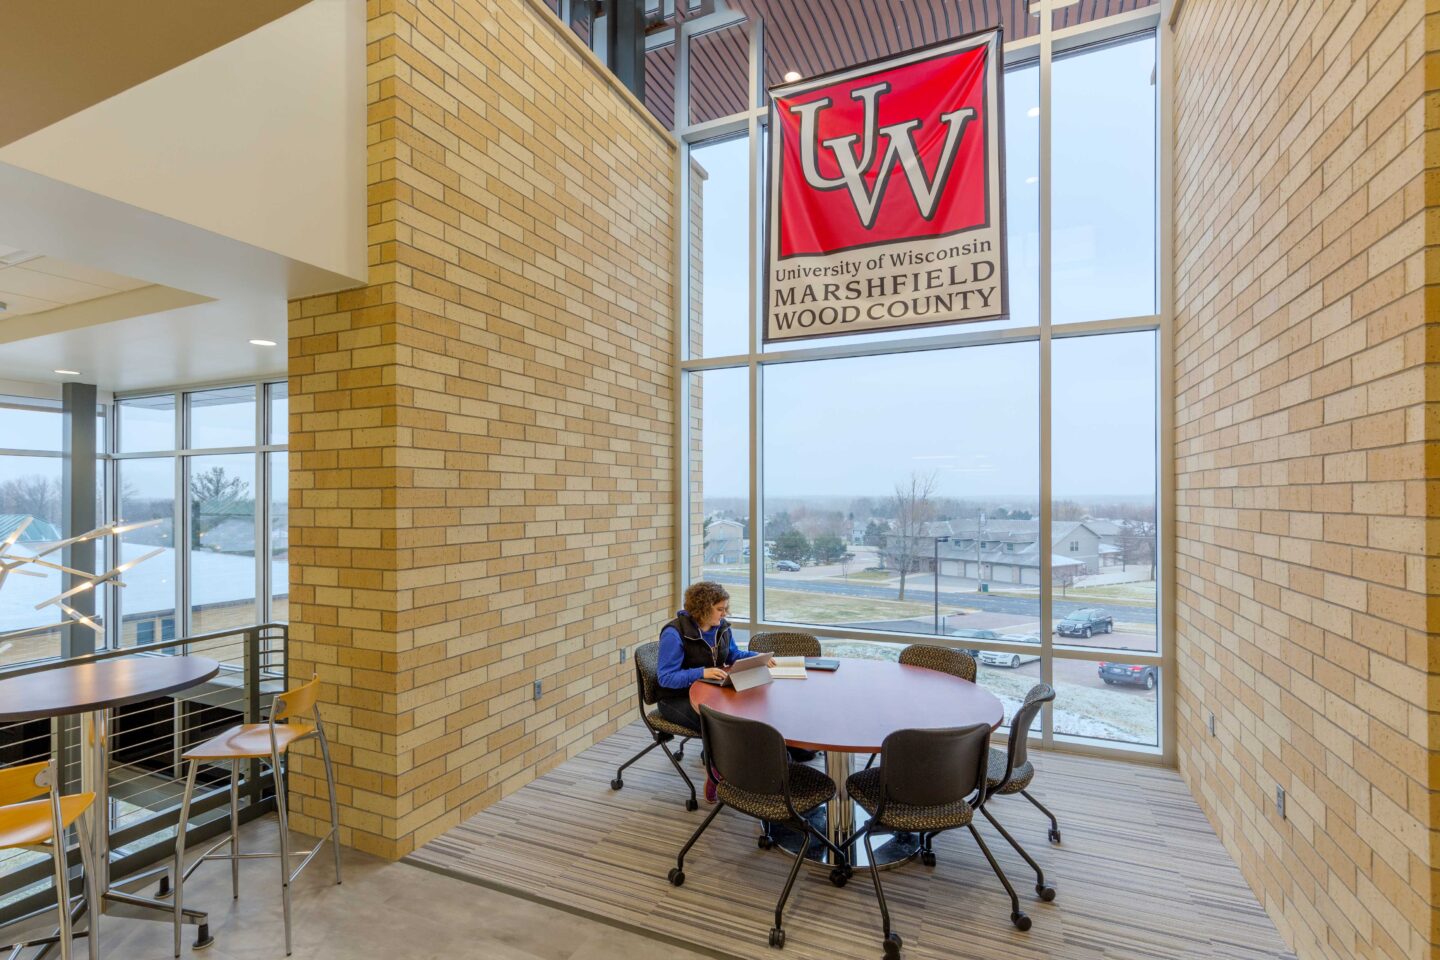 A student studies at a round table in a windowed alcove with a university banner above